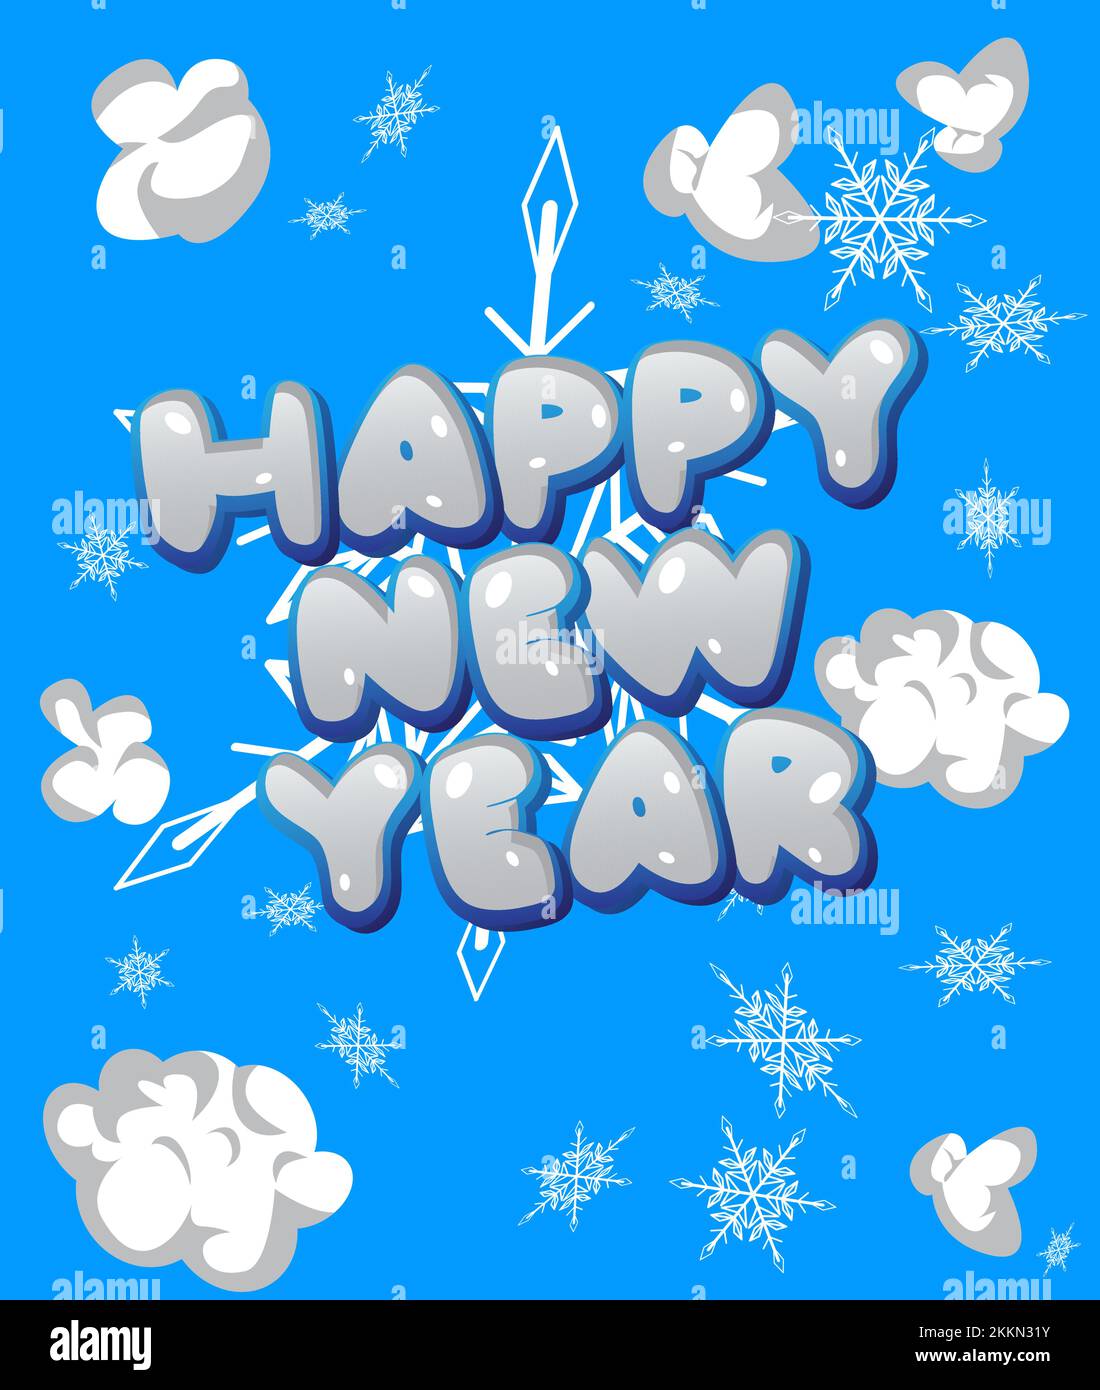 Snowflake background with Happy New Year text. Holiday event poster, Winter, Snow, Christmas banner. Stock Vector